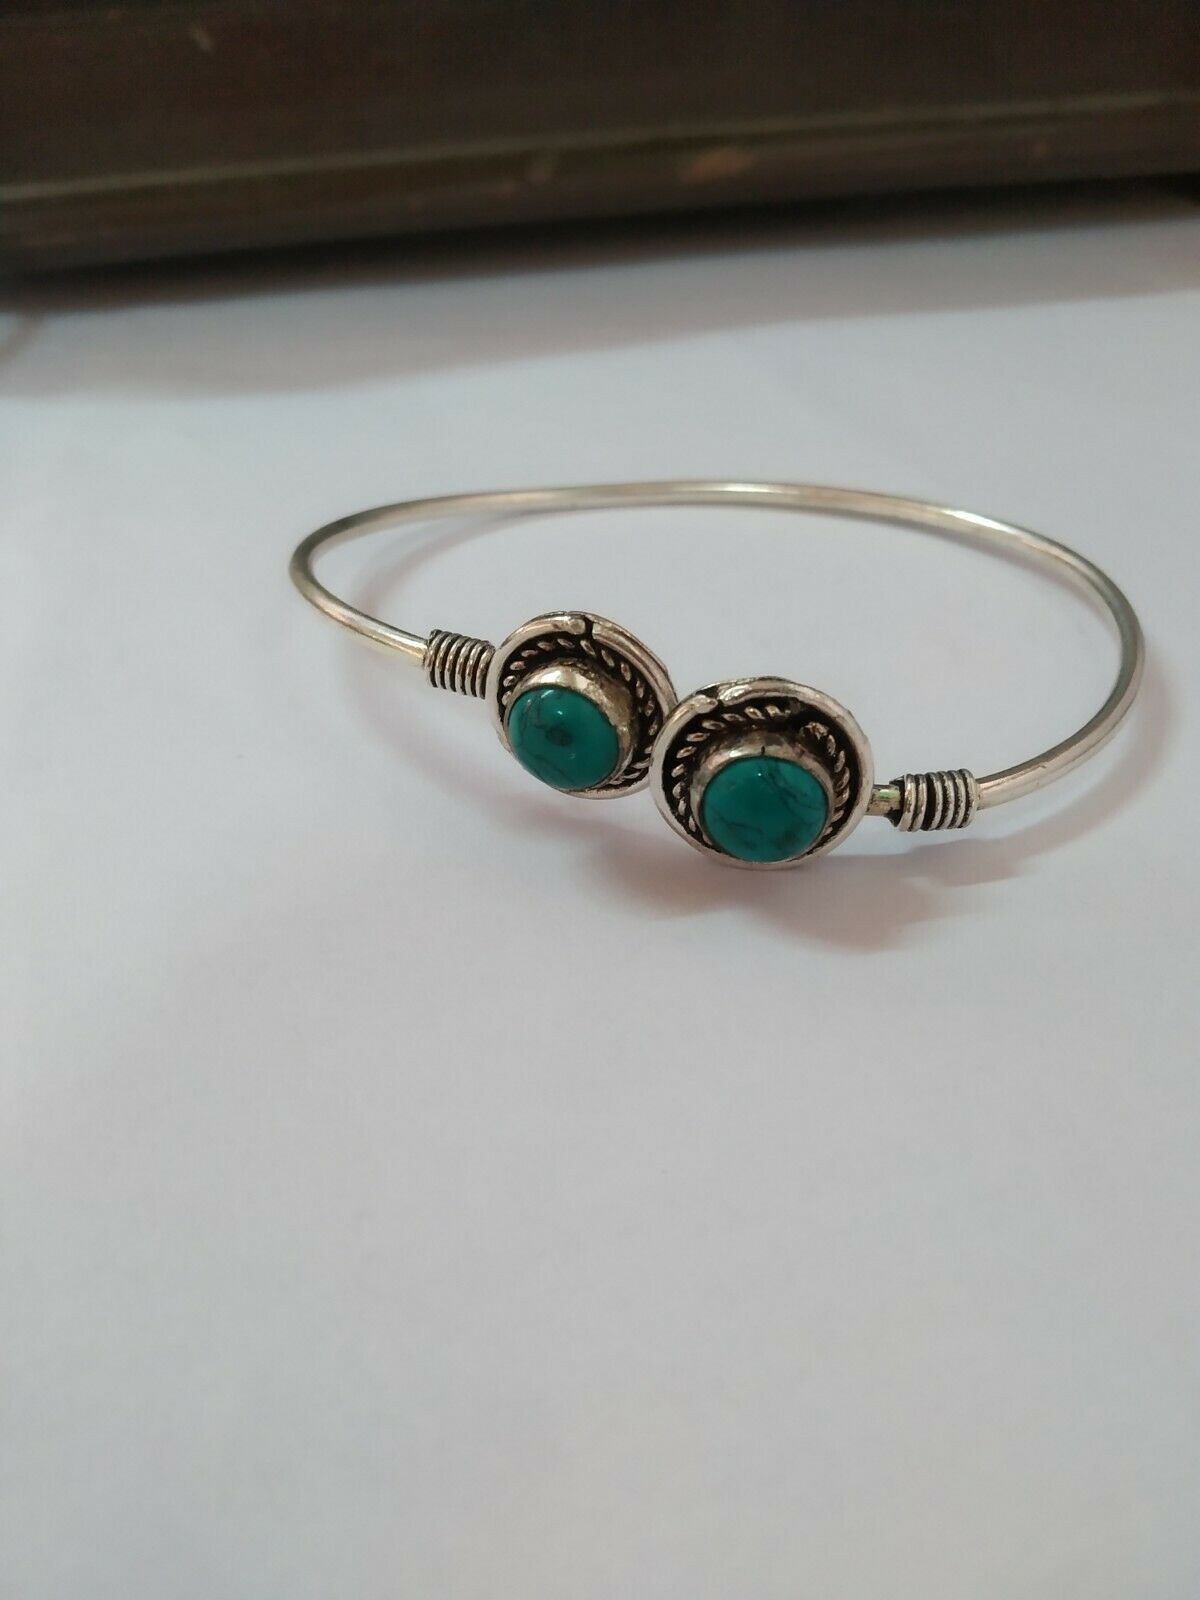 Buy Sterling Silver Bracelet with Composite Turquoise Online at Jayporecom